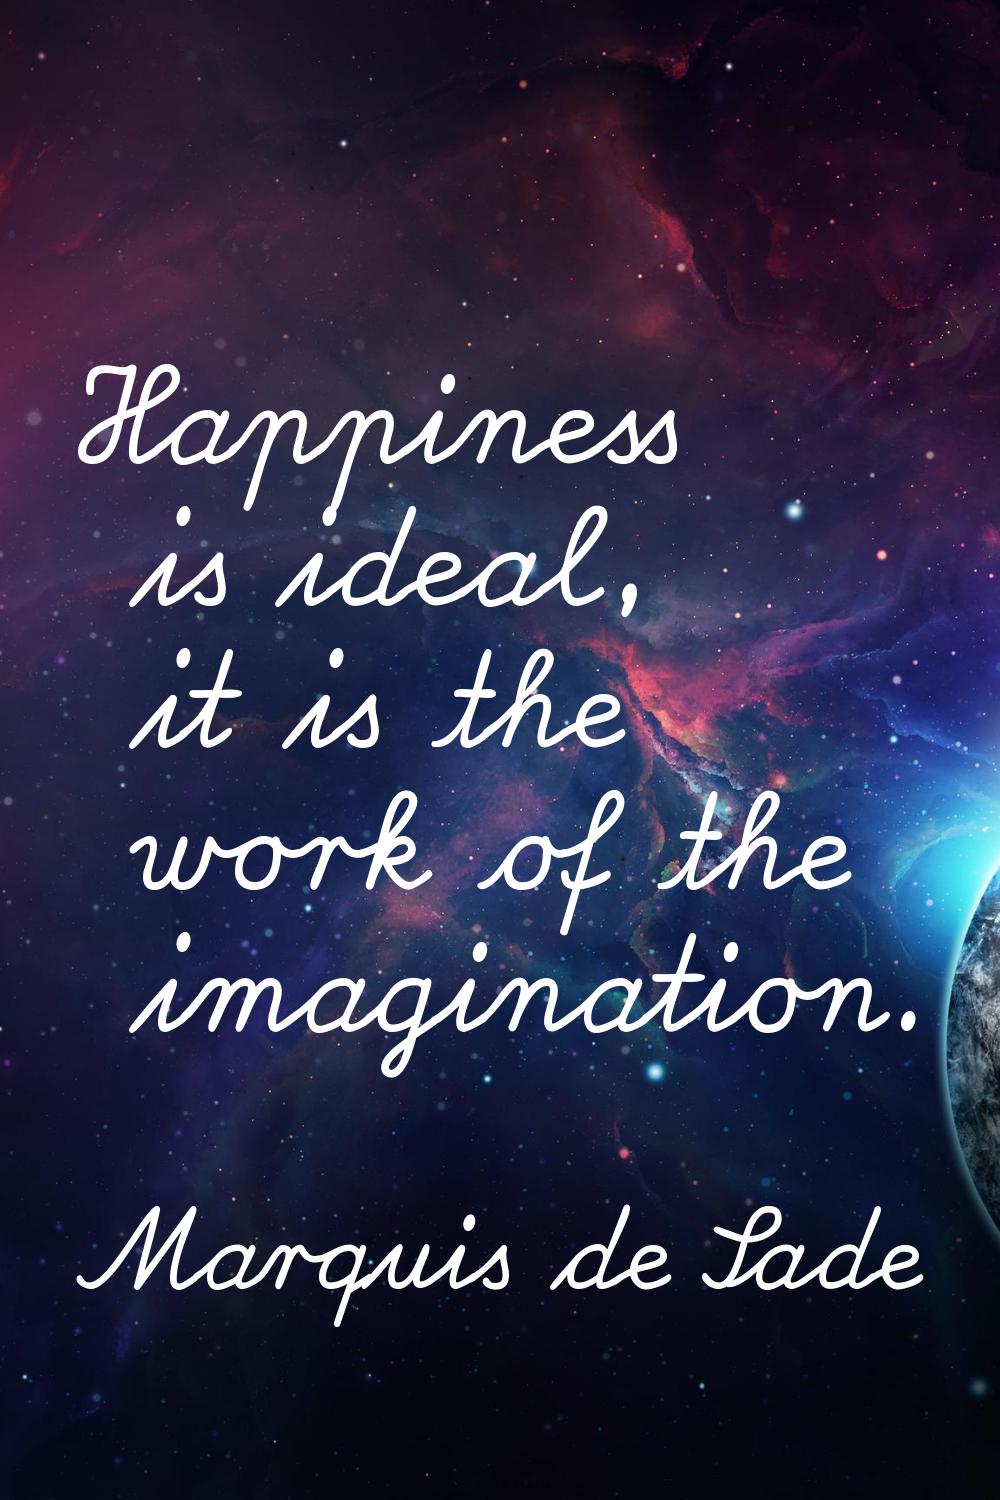 Happiness is ideal, it is the work of the imagination.